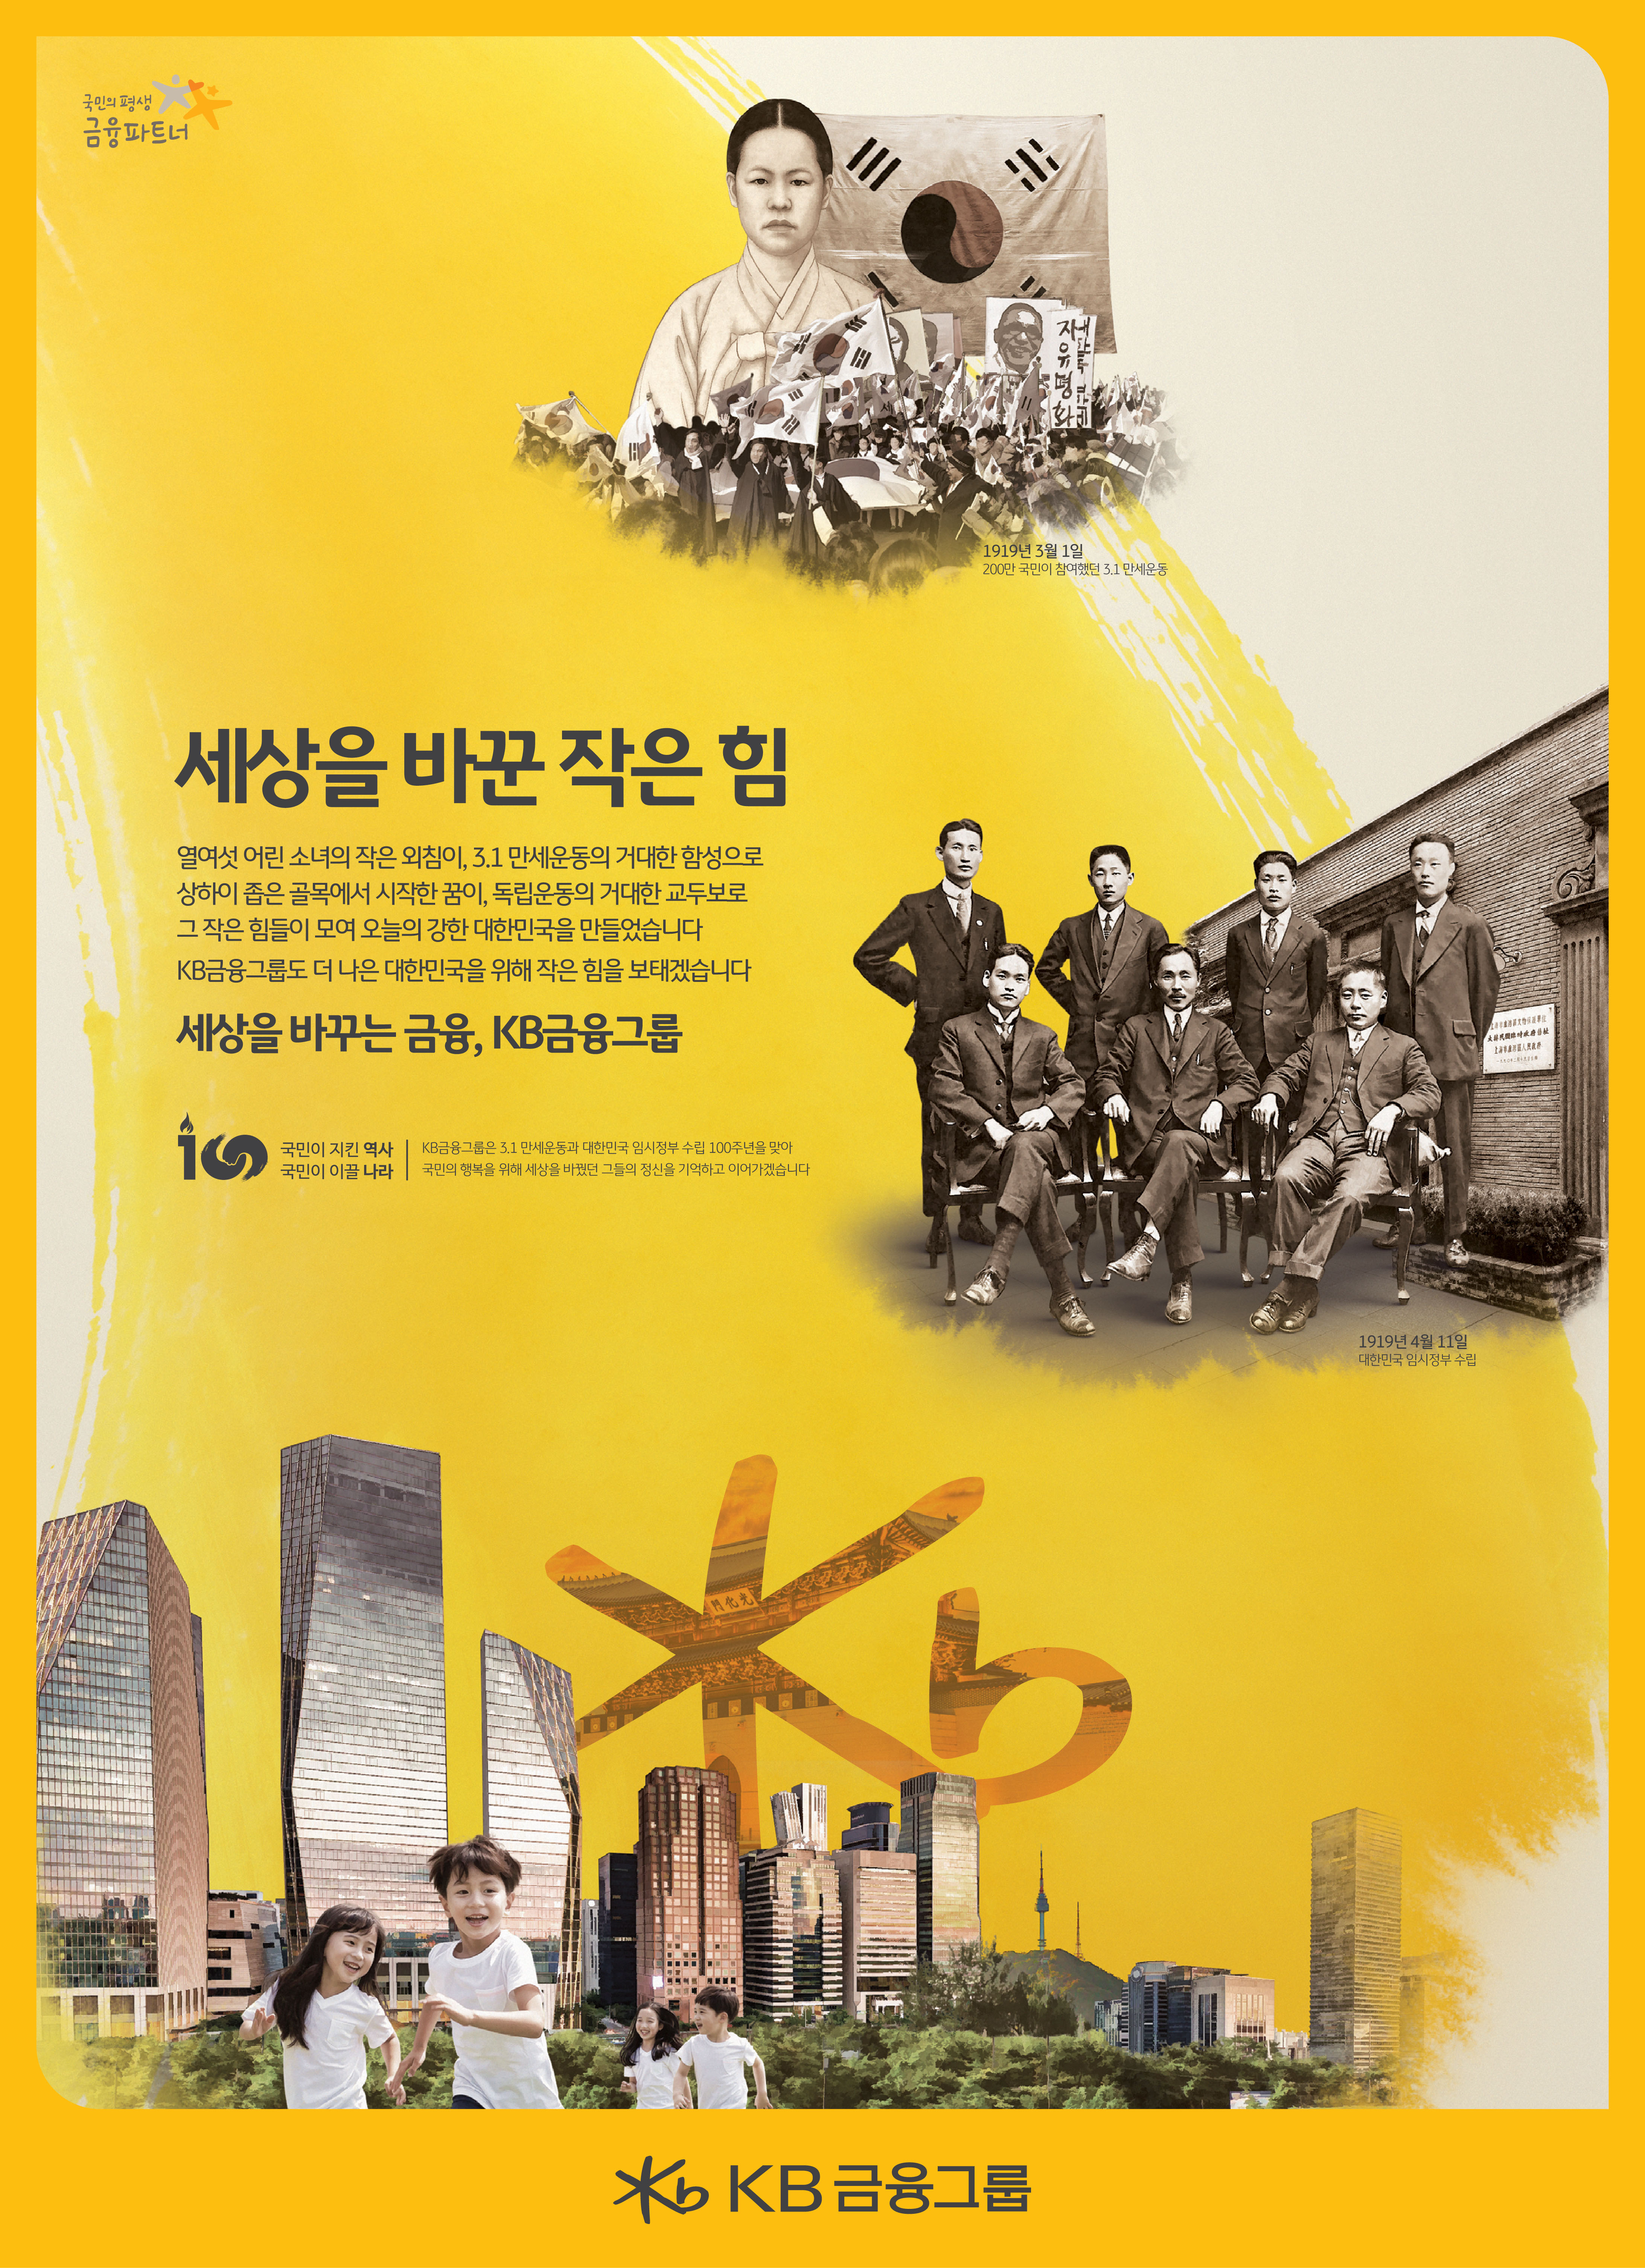 KB commemorates the Centennial of The March 1 Movement ＆ The Establishment of the Provisional Government of the Republic of Korea ①A Small Force that could have changed the world